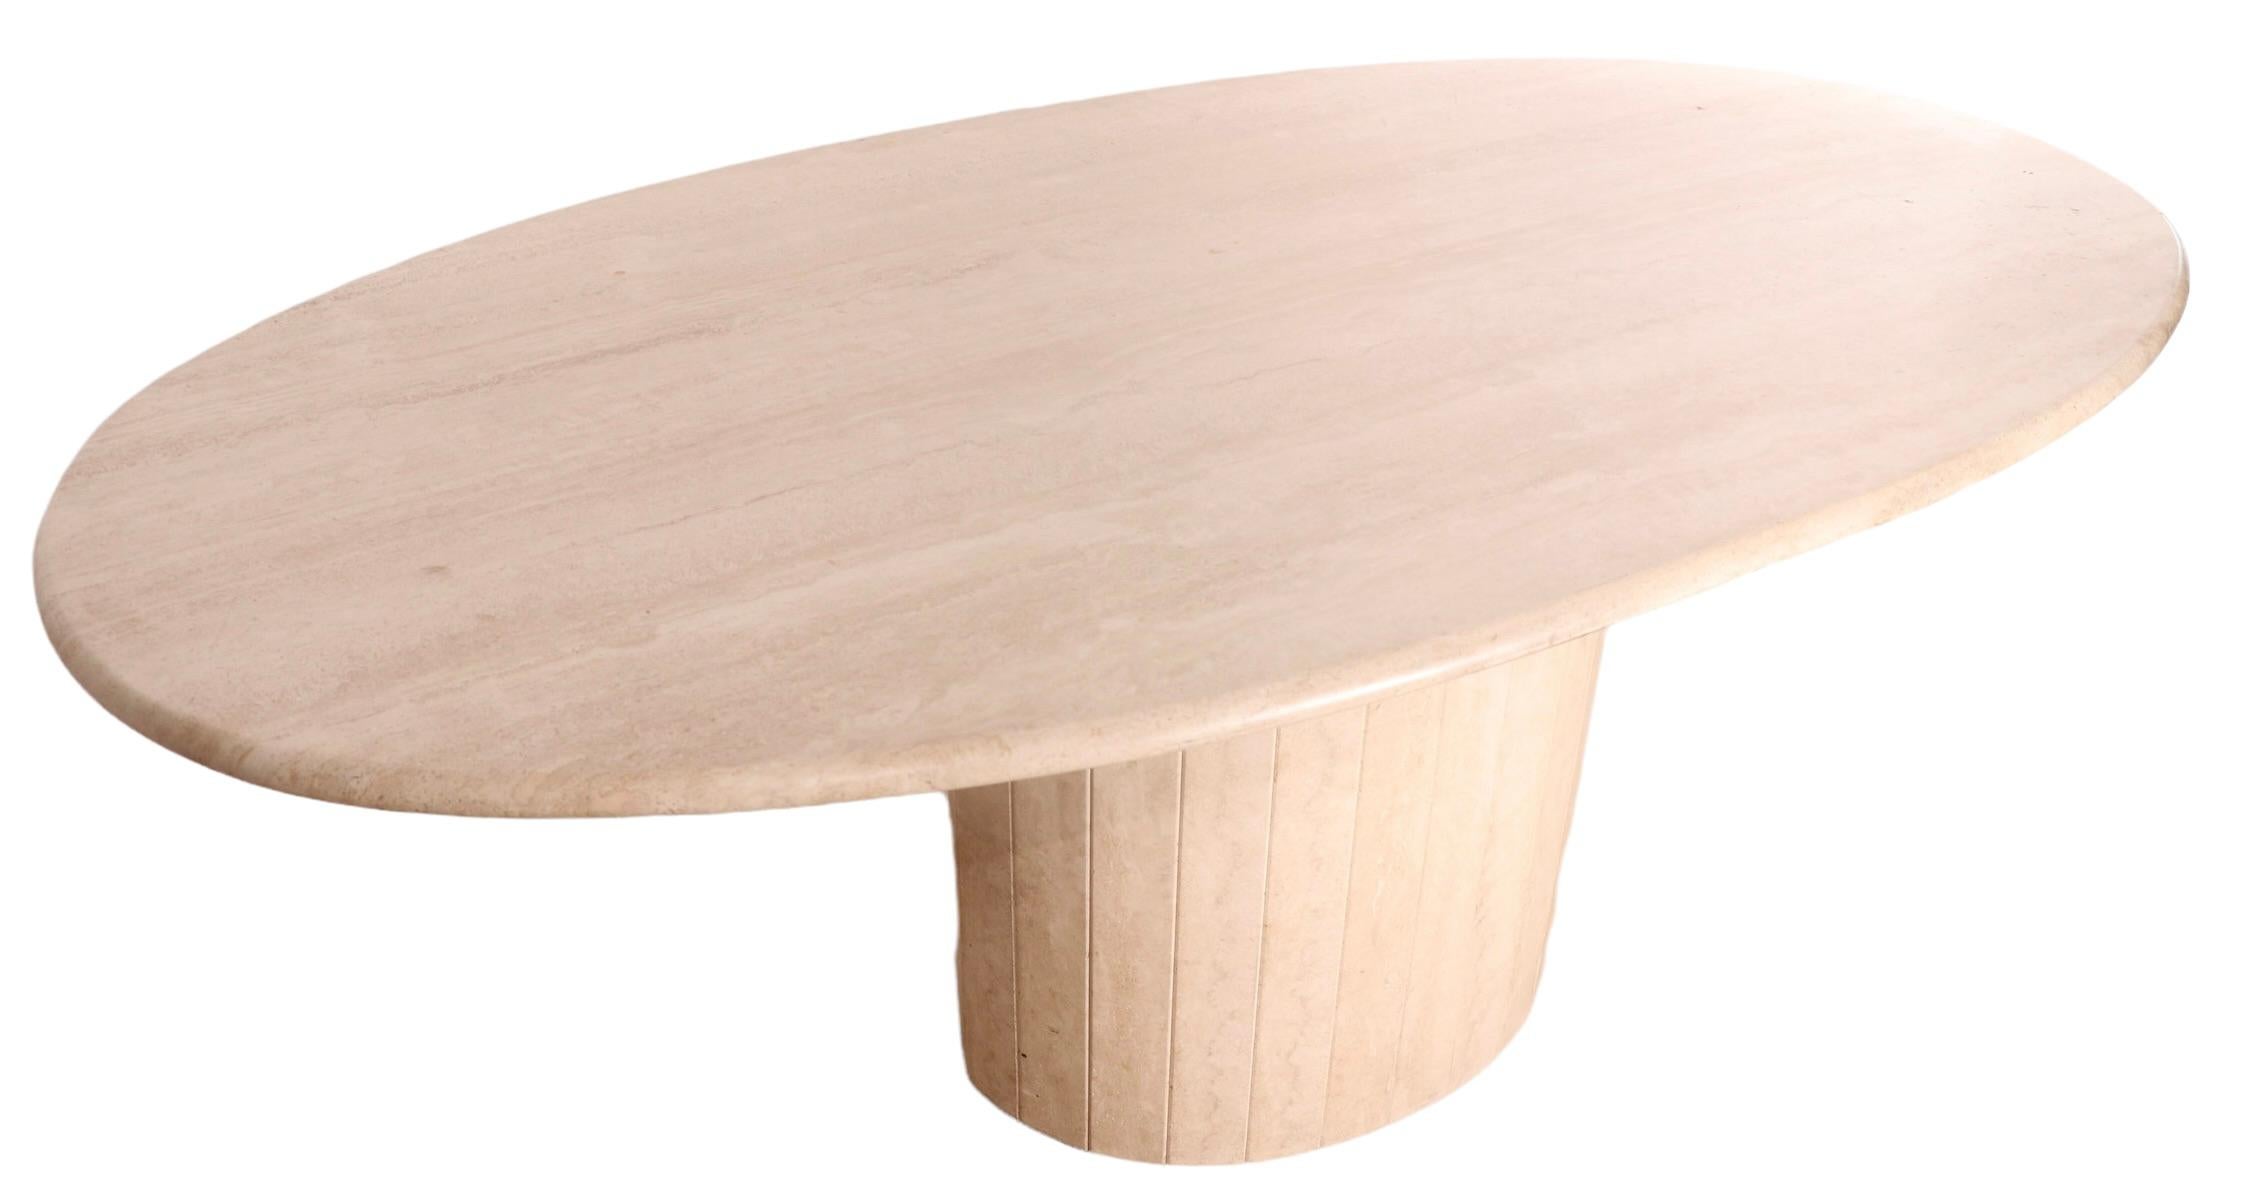 Oval Pedestal Base Travertine Marble Dining Table Made in Italy ca. 1970-1980’s 4